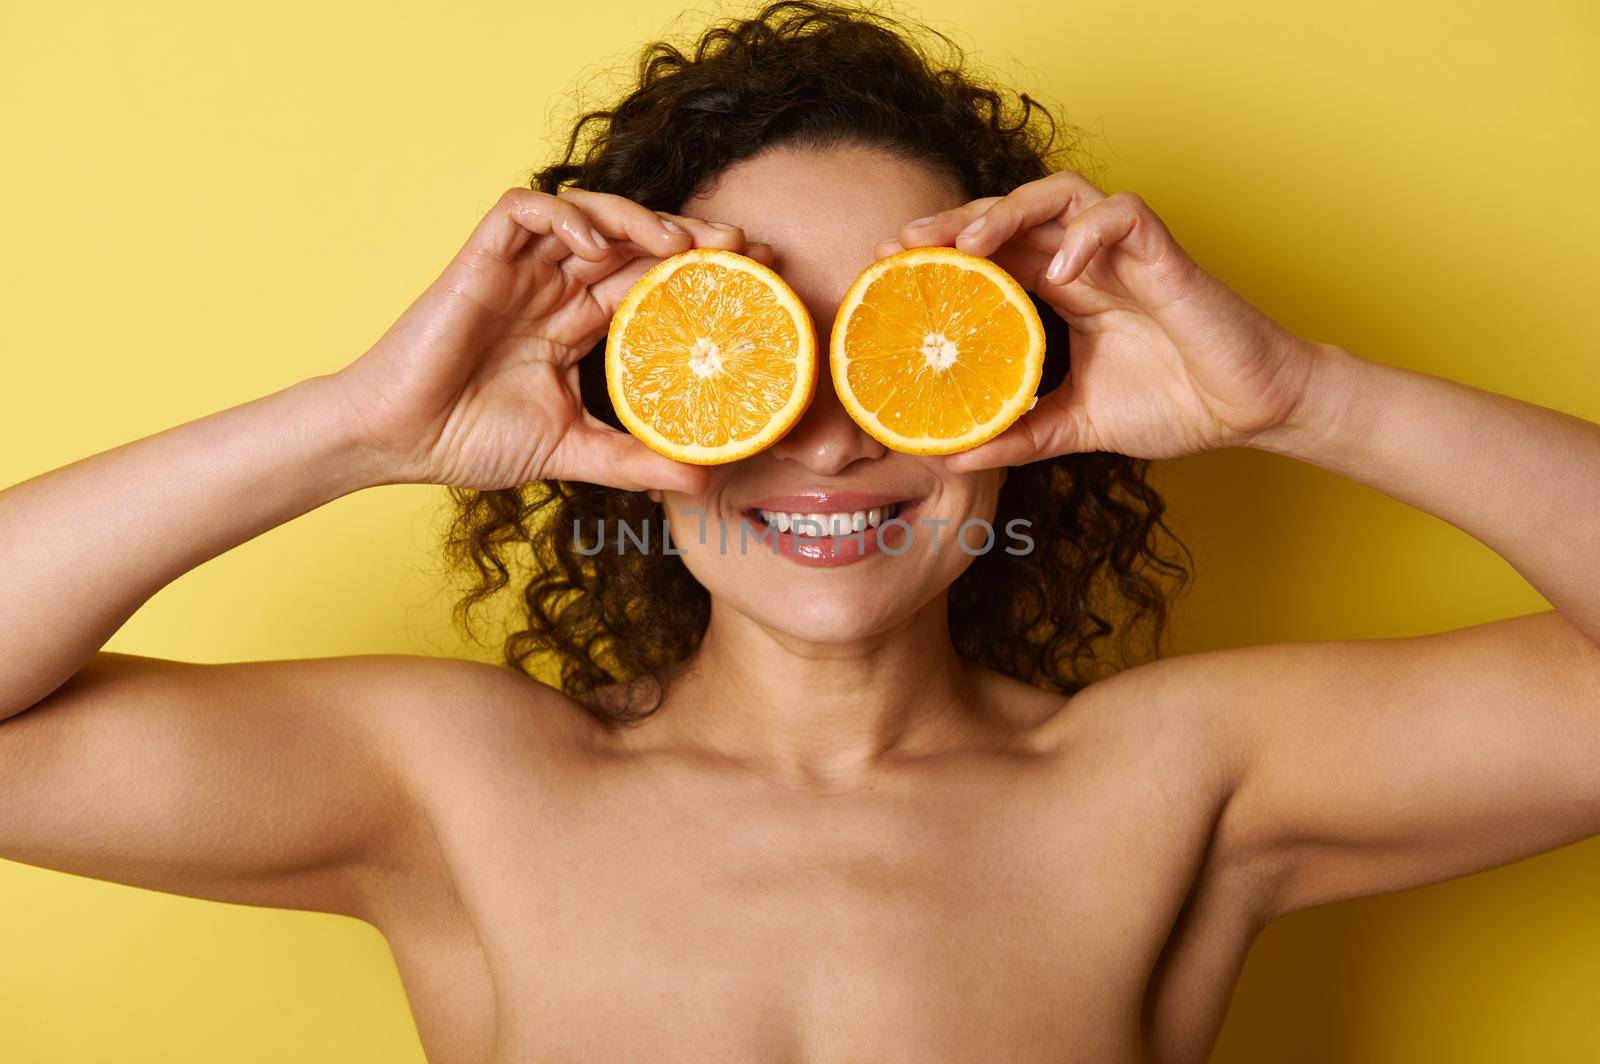 Smiling mixed race muscular woman covering her eyes with sweet orange halves, smiling while posing against yellow background by artgf